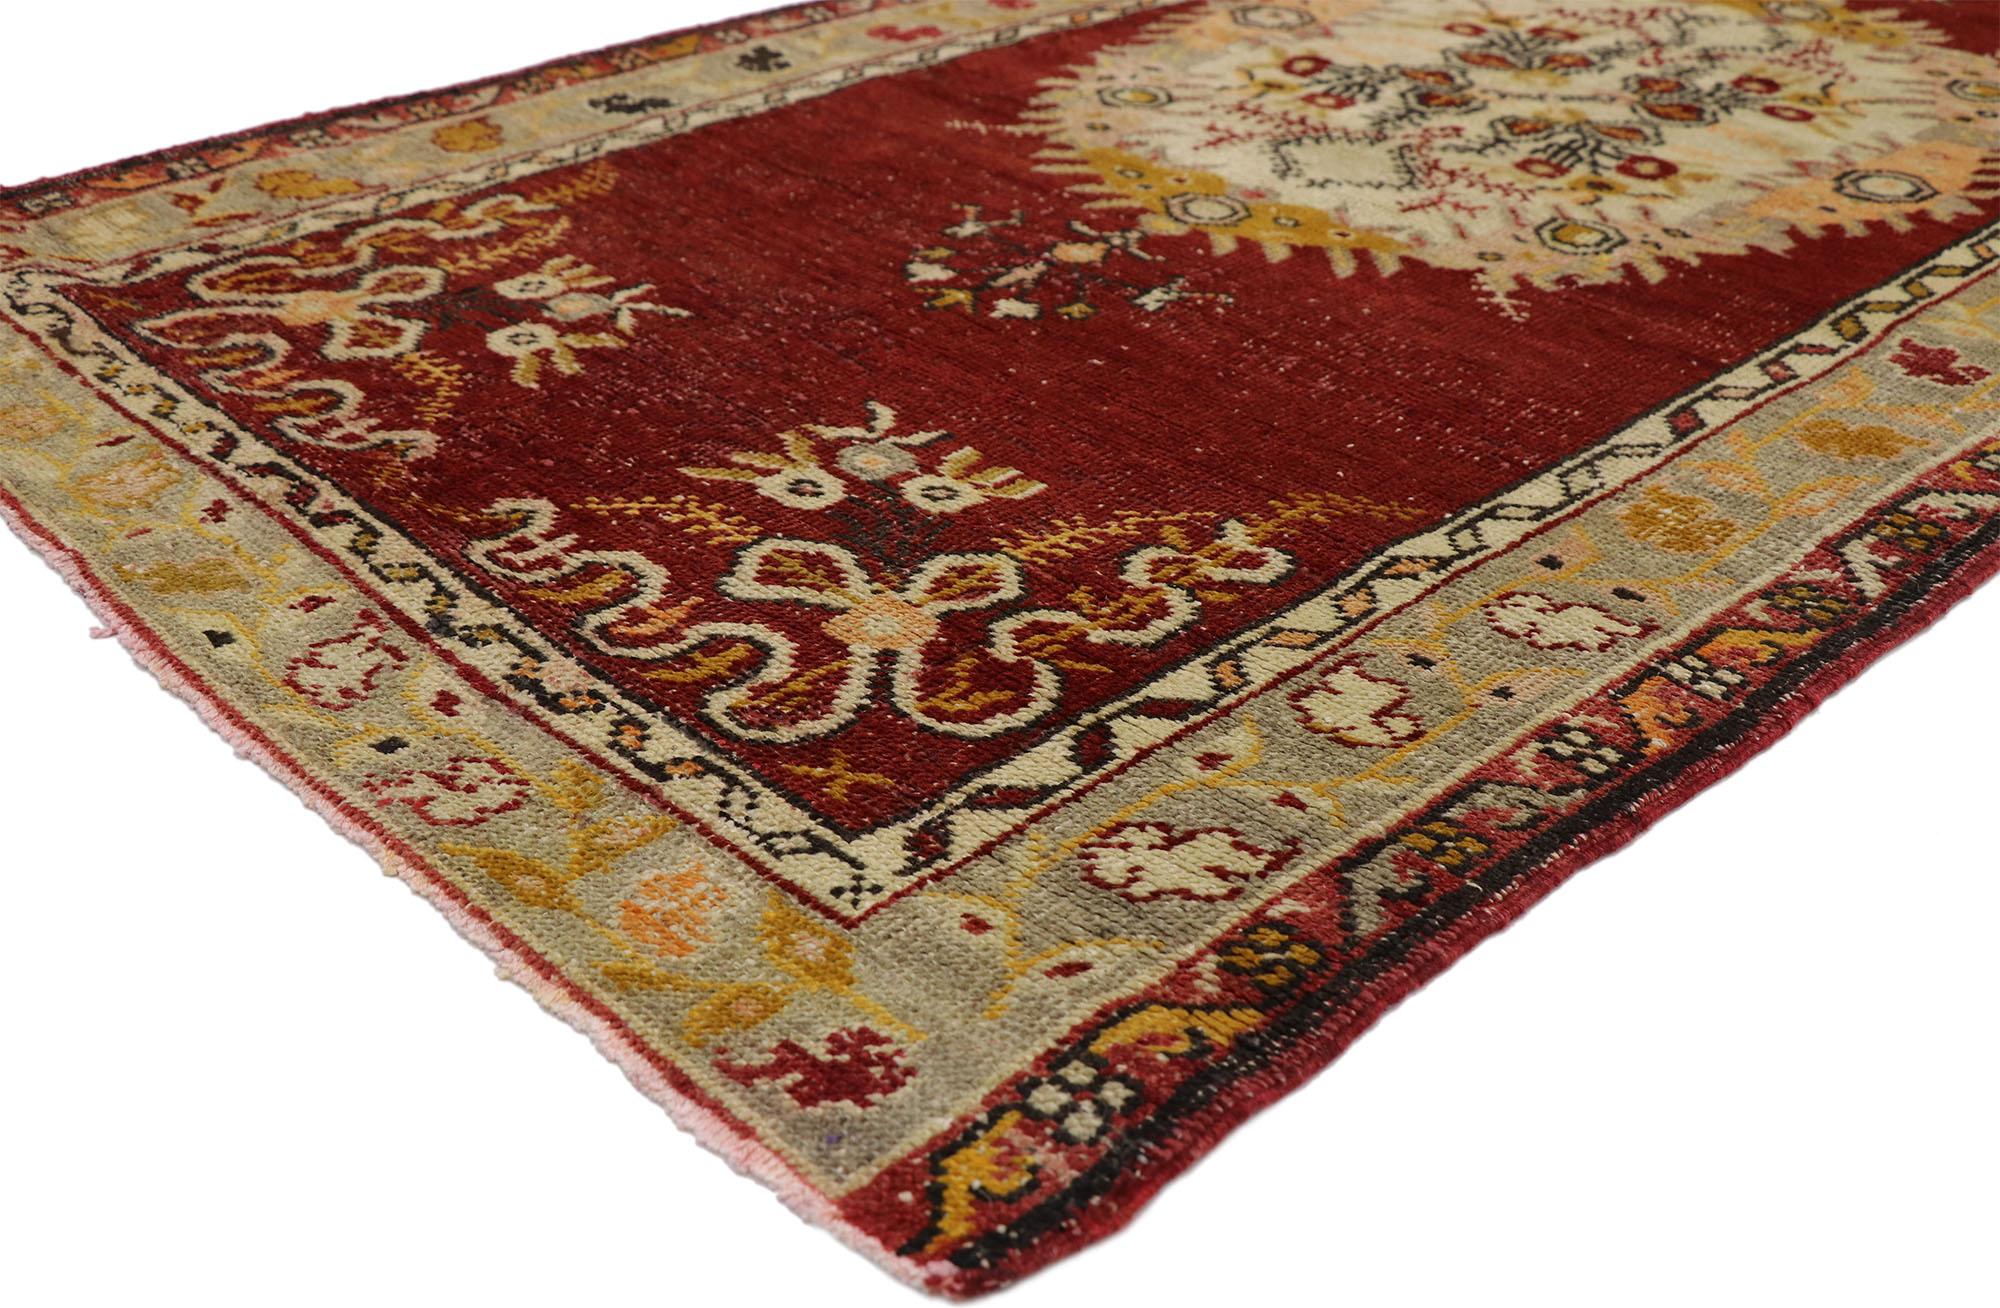 51202, distressed vintage Turkish Oushak hallway runner with rustic French Rococo style. This hand knotted wool distressed vintage Turkish Oushak runner features three round central medallions filled with stylized geometric flowers to the centre.